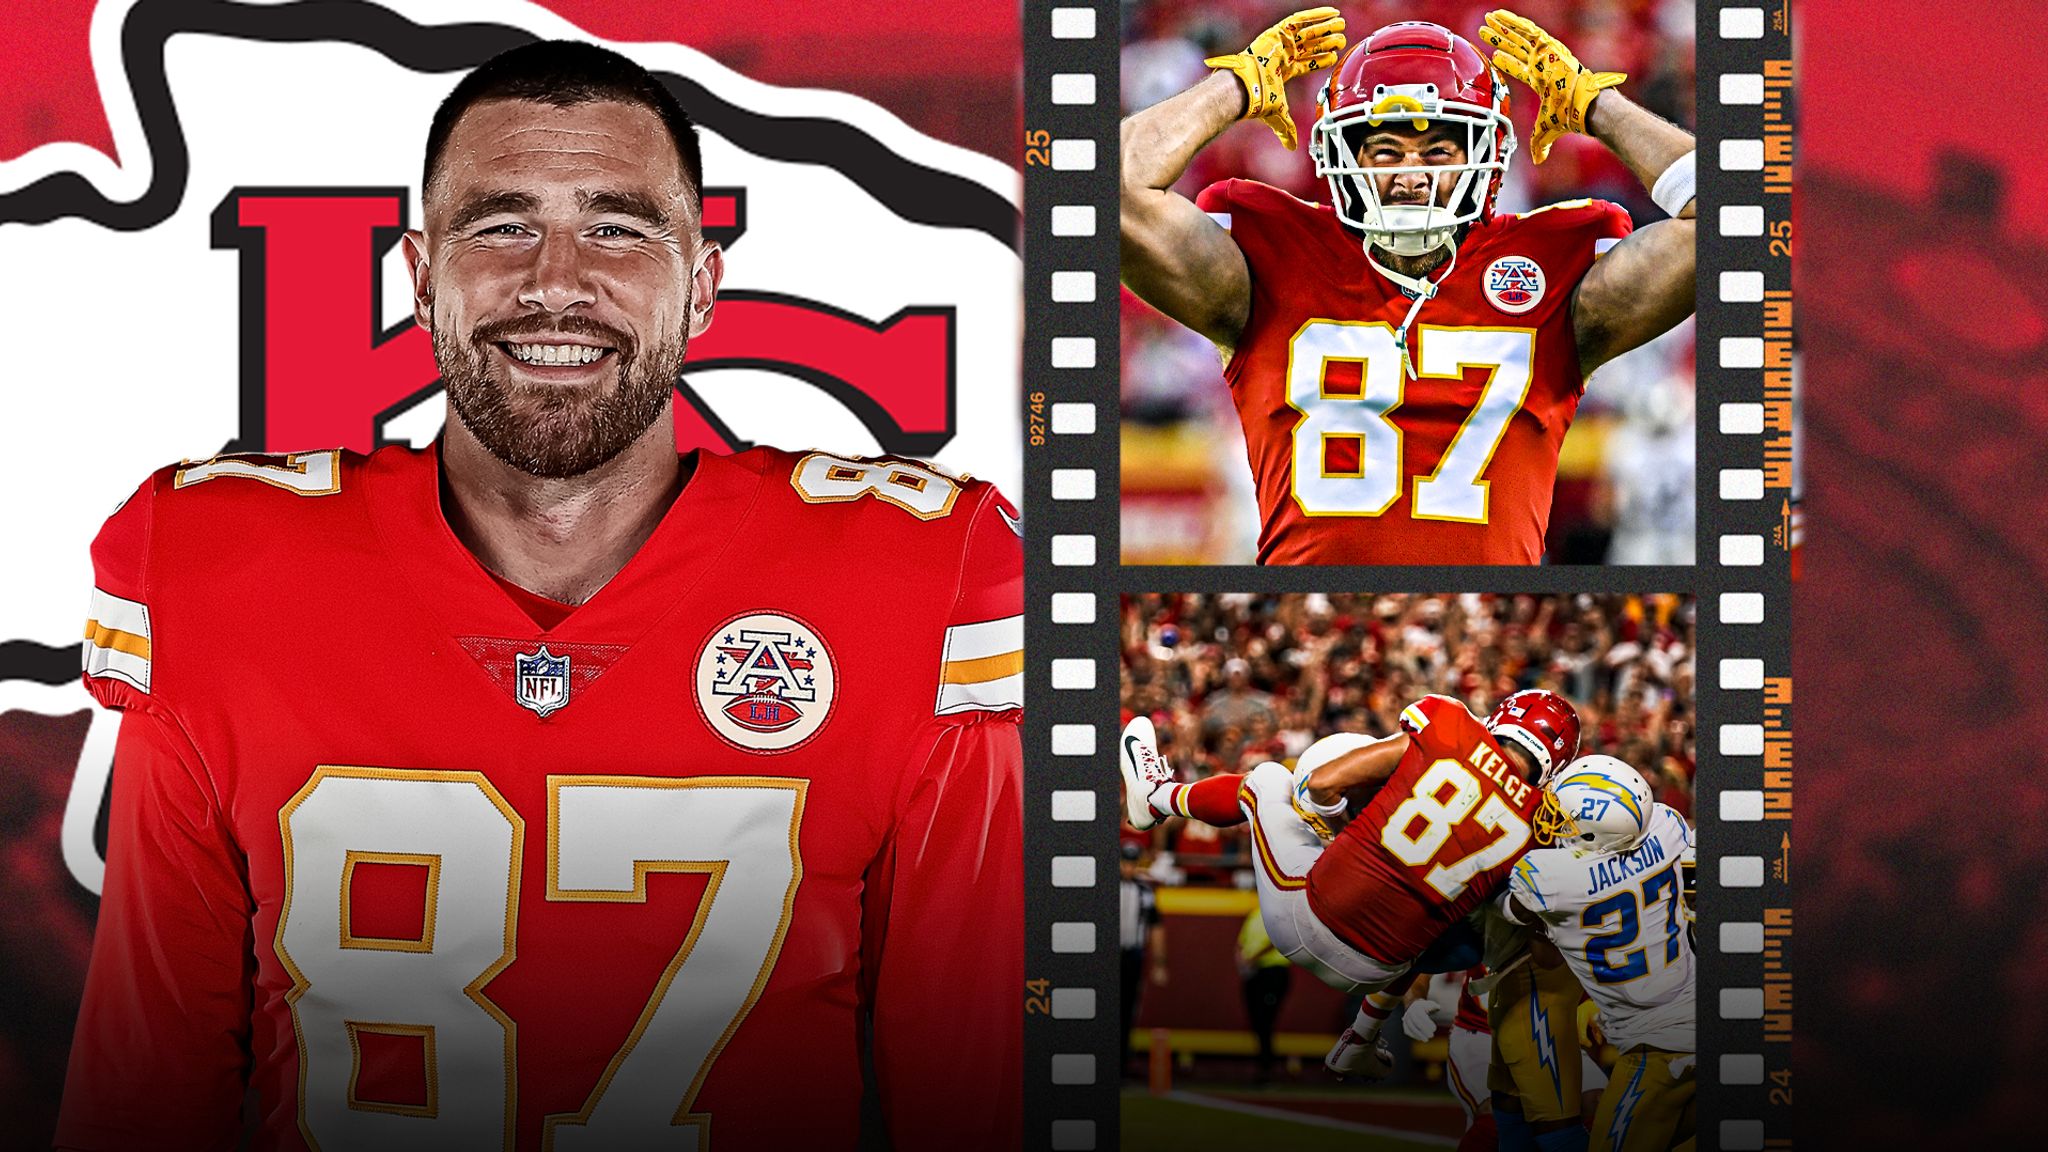 Travis Kelce: The Kansas City Chiefs tight end's rise to NFL greatness ahead of Super Bowl LVII